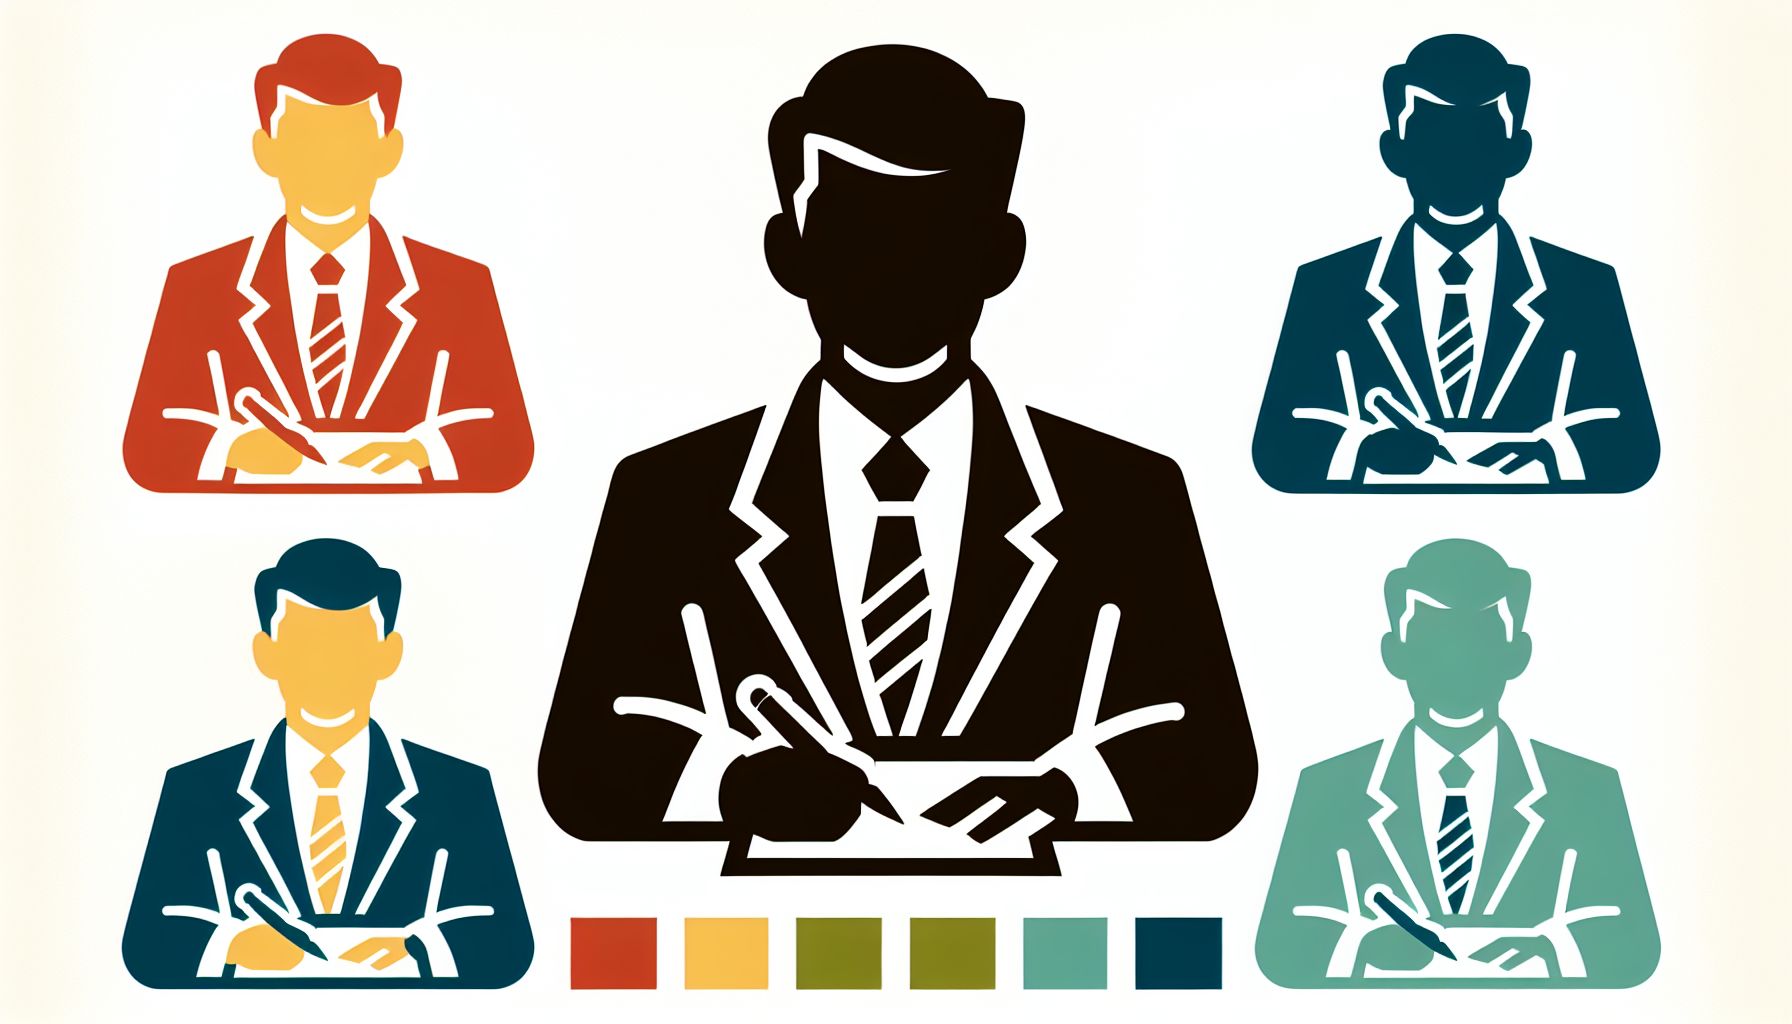 Advisor in flat illustration style and white background, red #f47574, green #88c7a8, yellow #fcc44b, and blue #645bc8 colors.